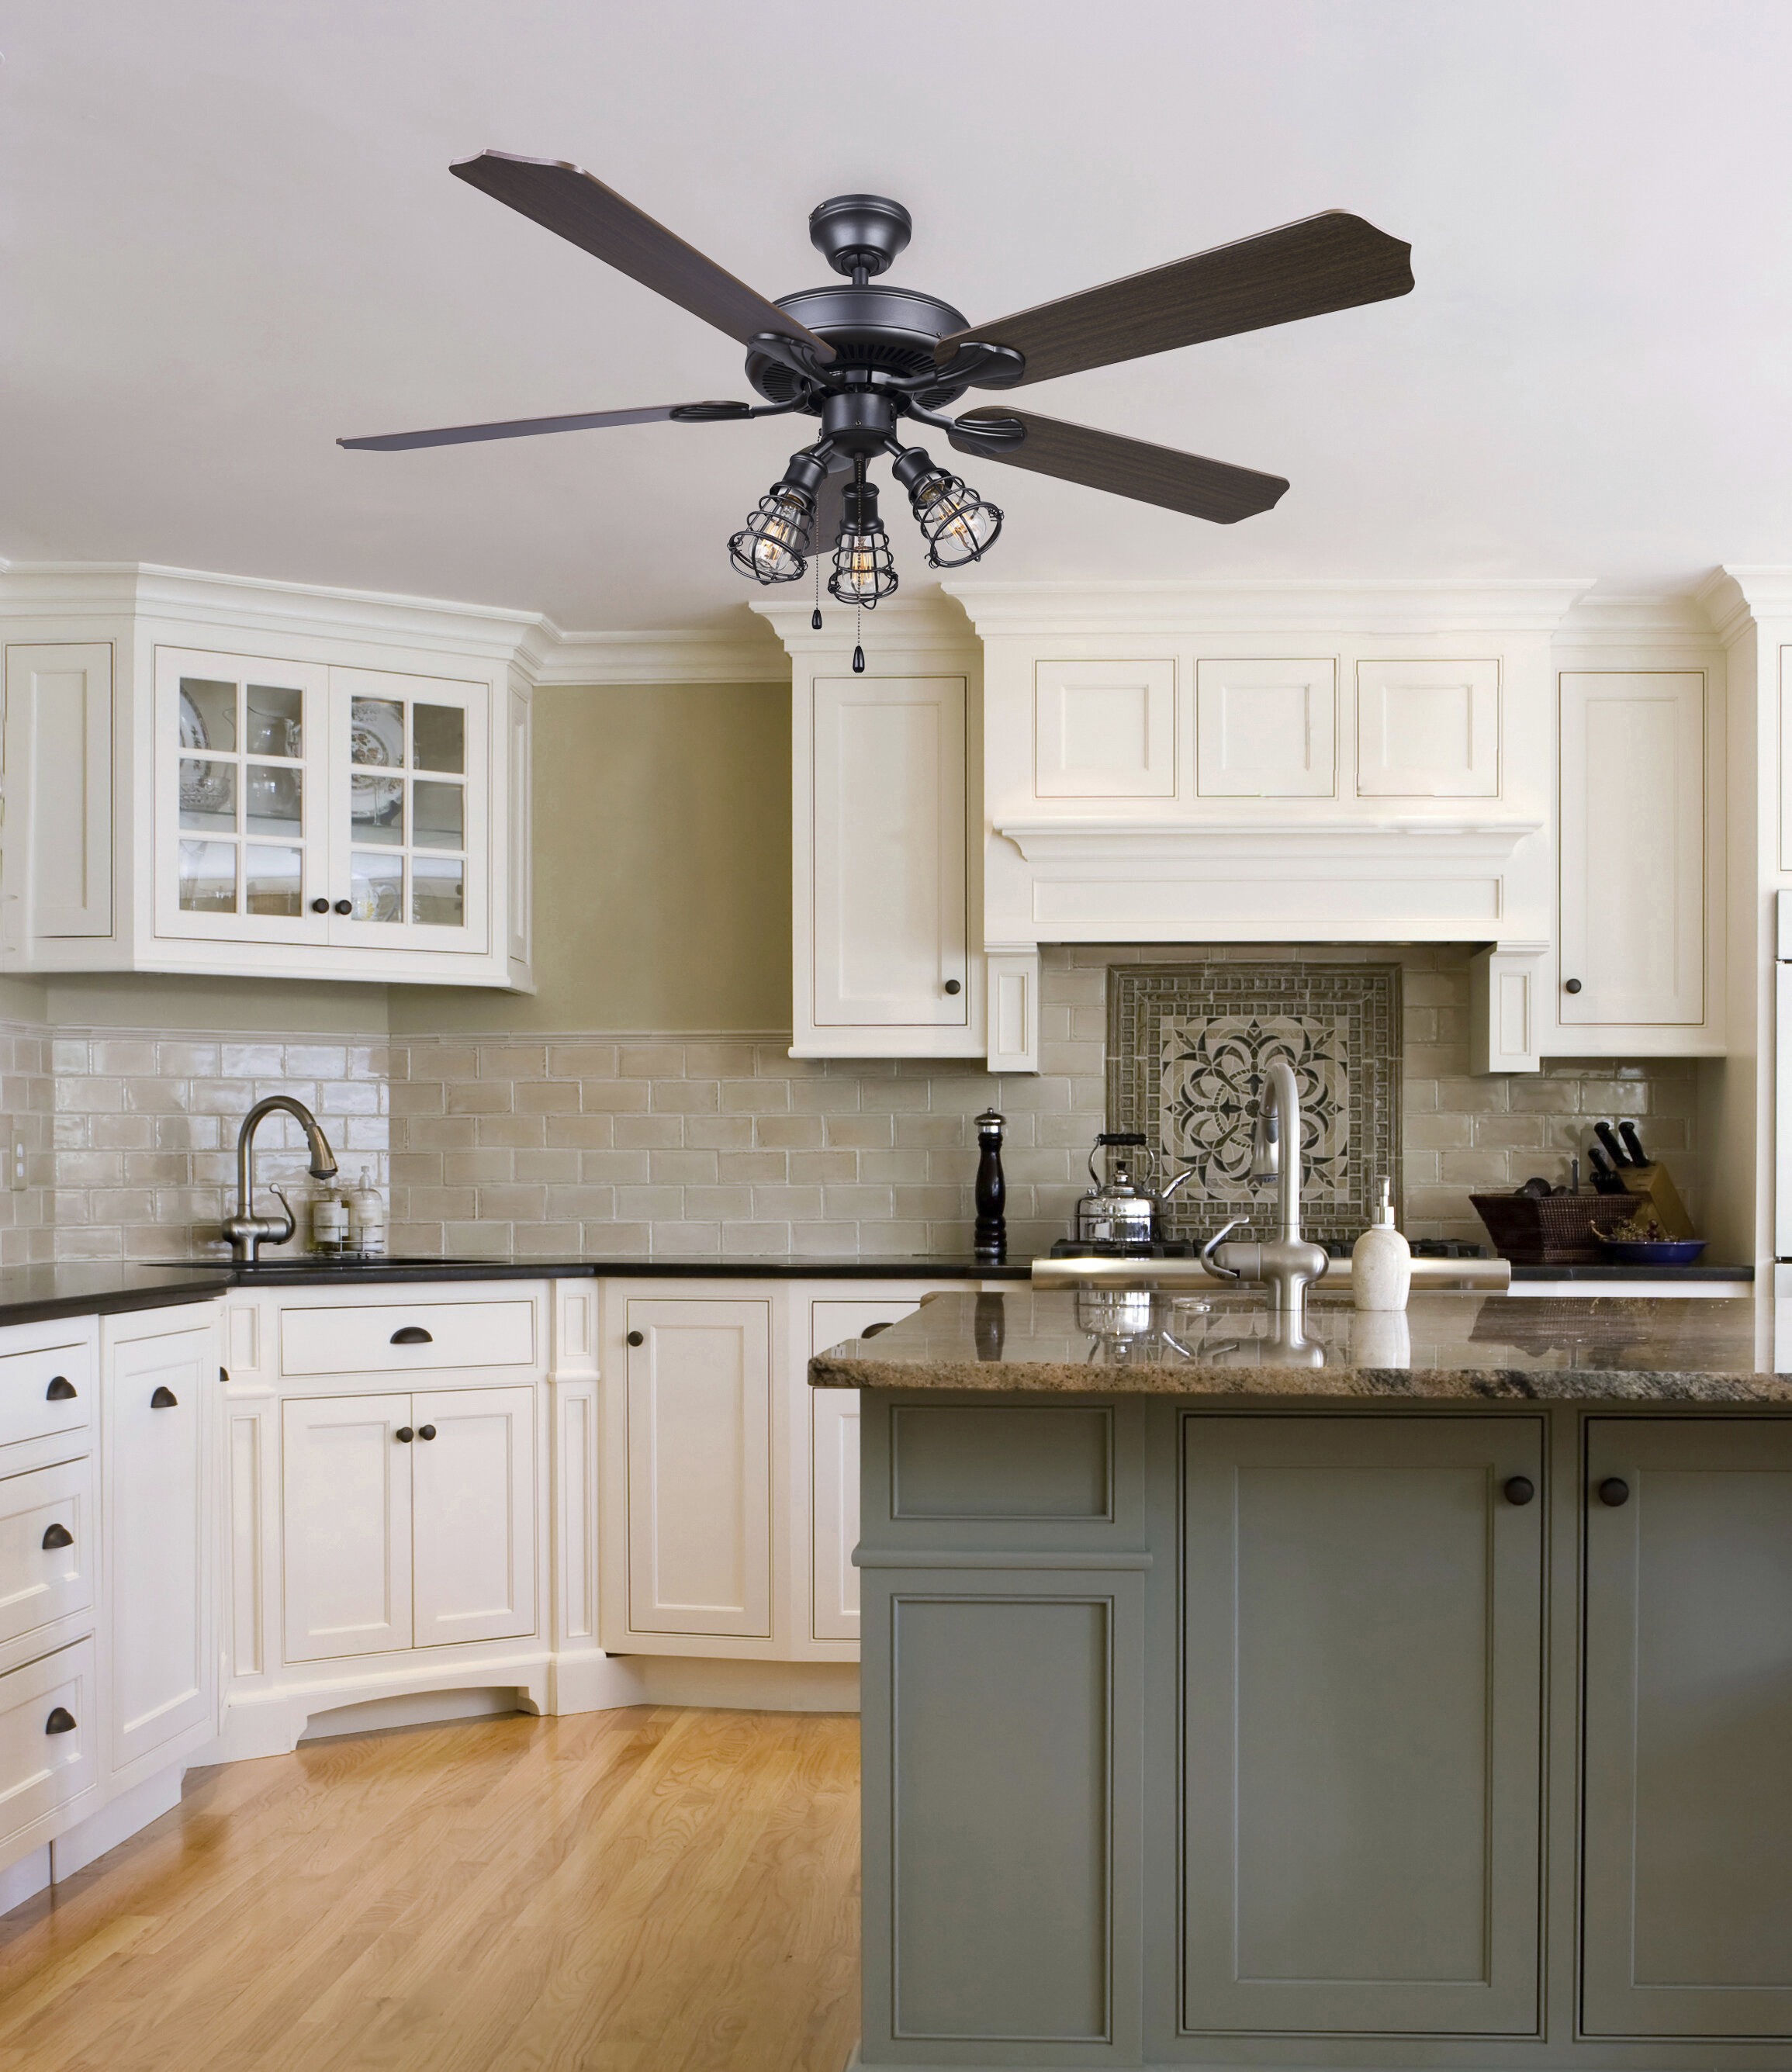 Kitchen Fan Light / Best Ceiling Fans For Kitchens Ultimate Buying